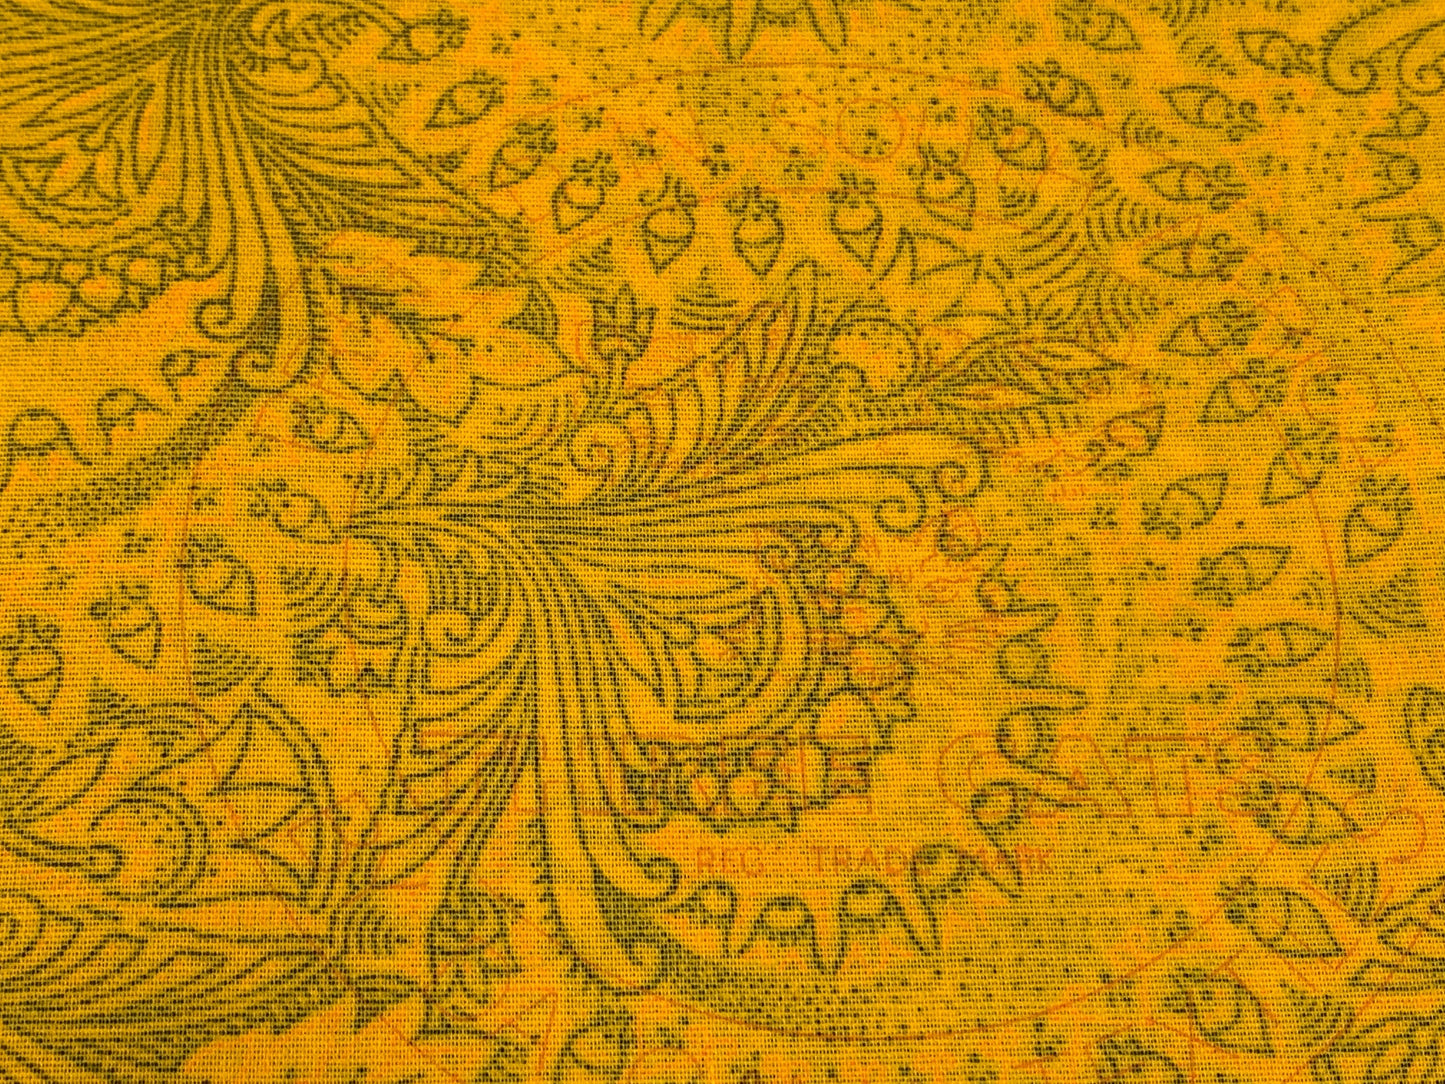 Yellow South African Shweshwe Fabric by the YARD. DaGama 3 Cats Large Yellow Large Paisley. Cotton Print Fabric for Quilting, Apparel, Décor